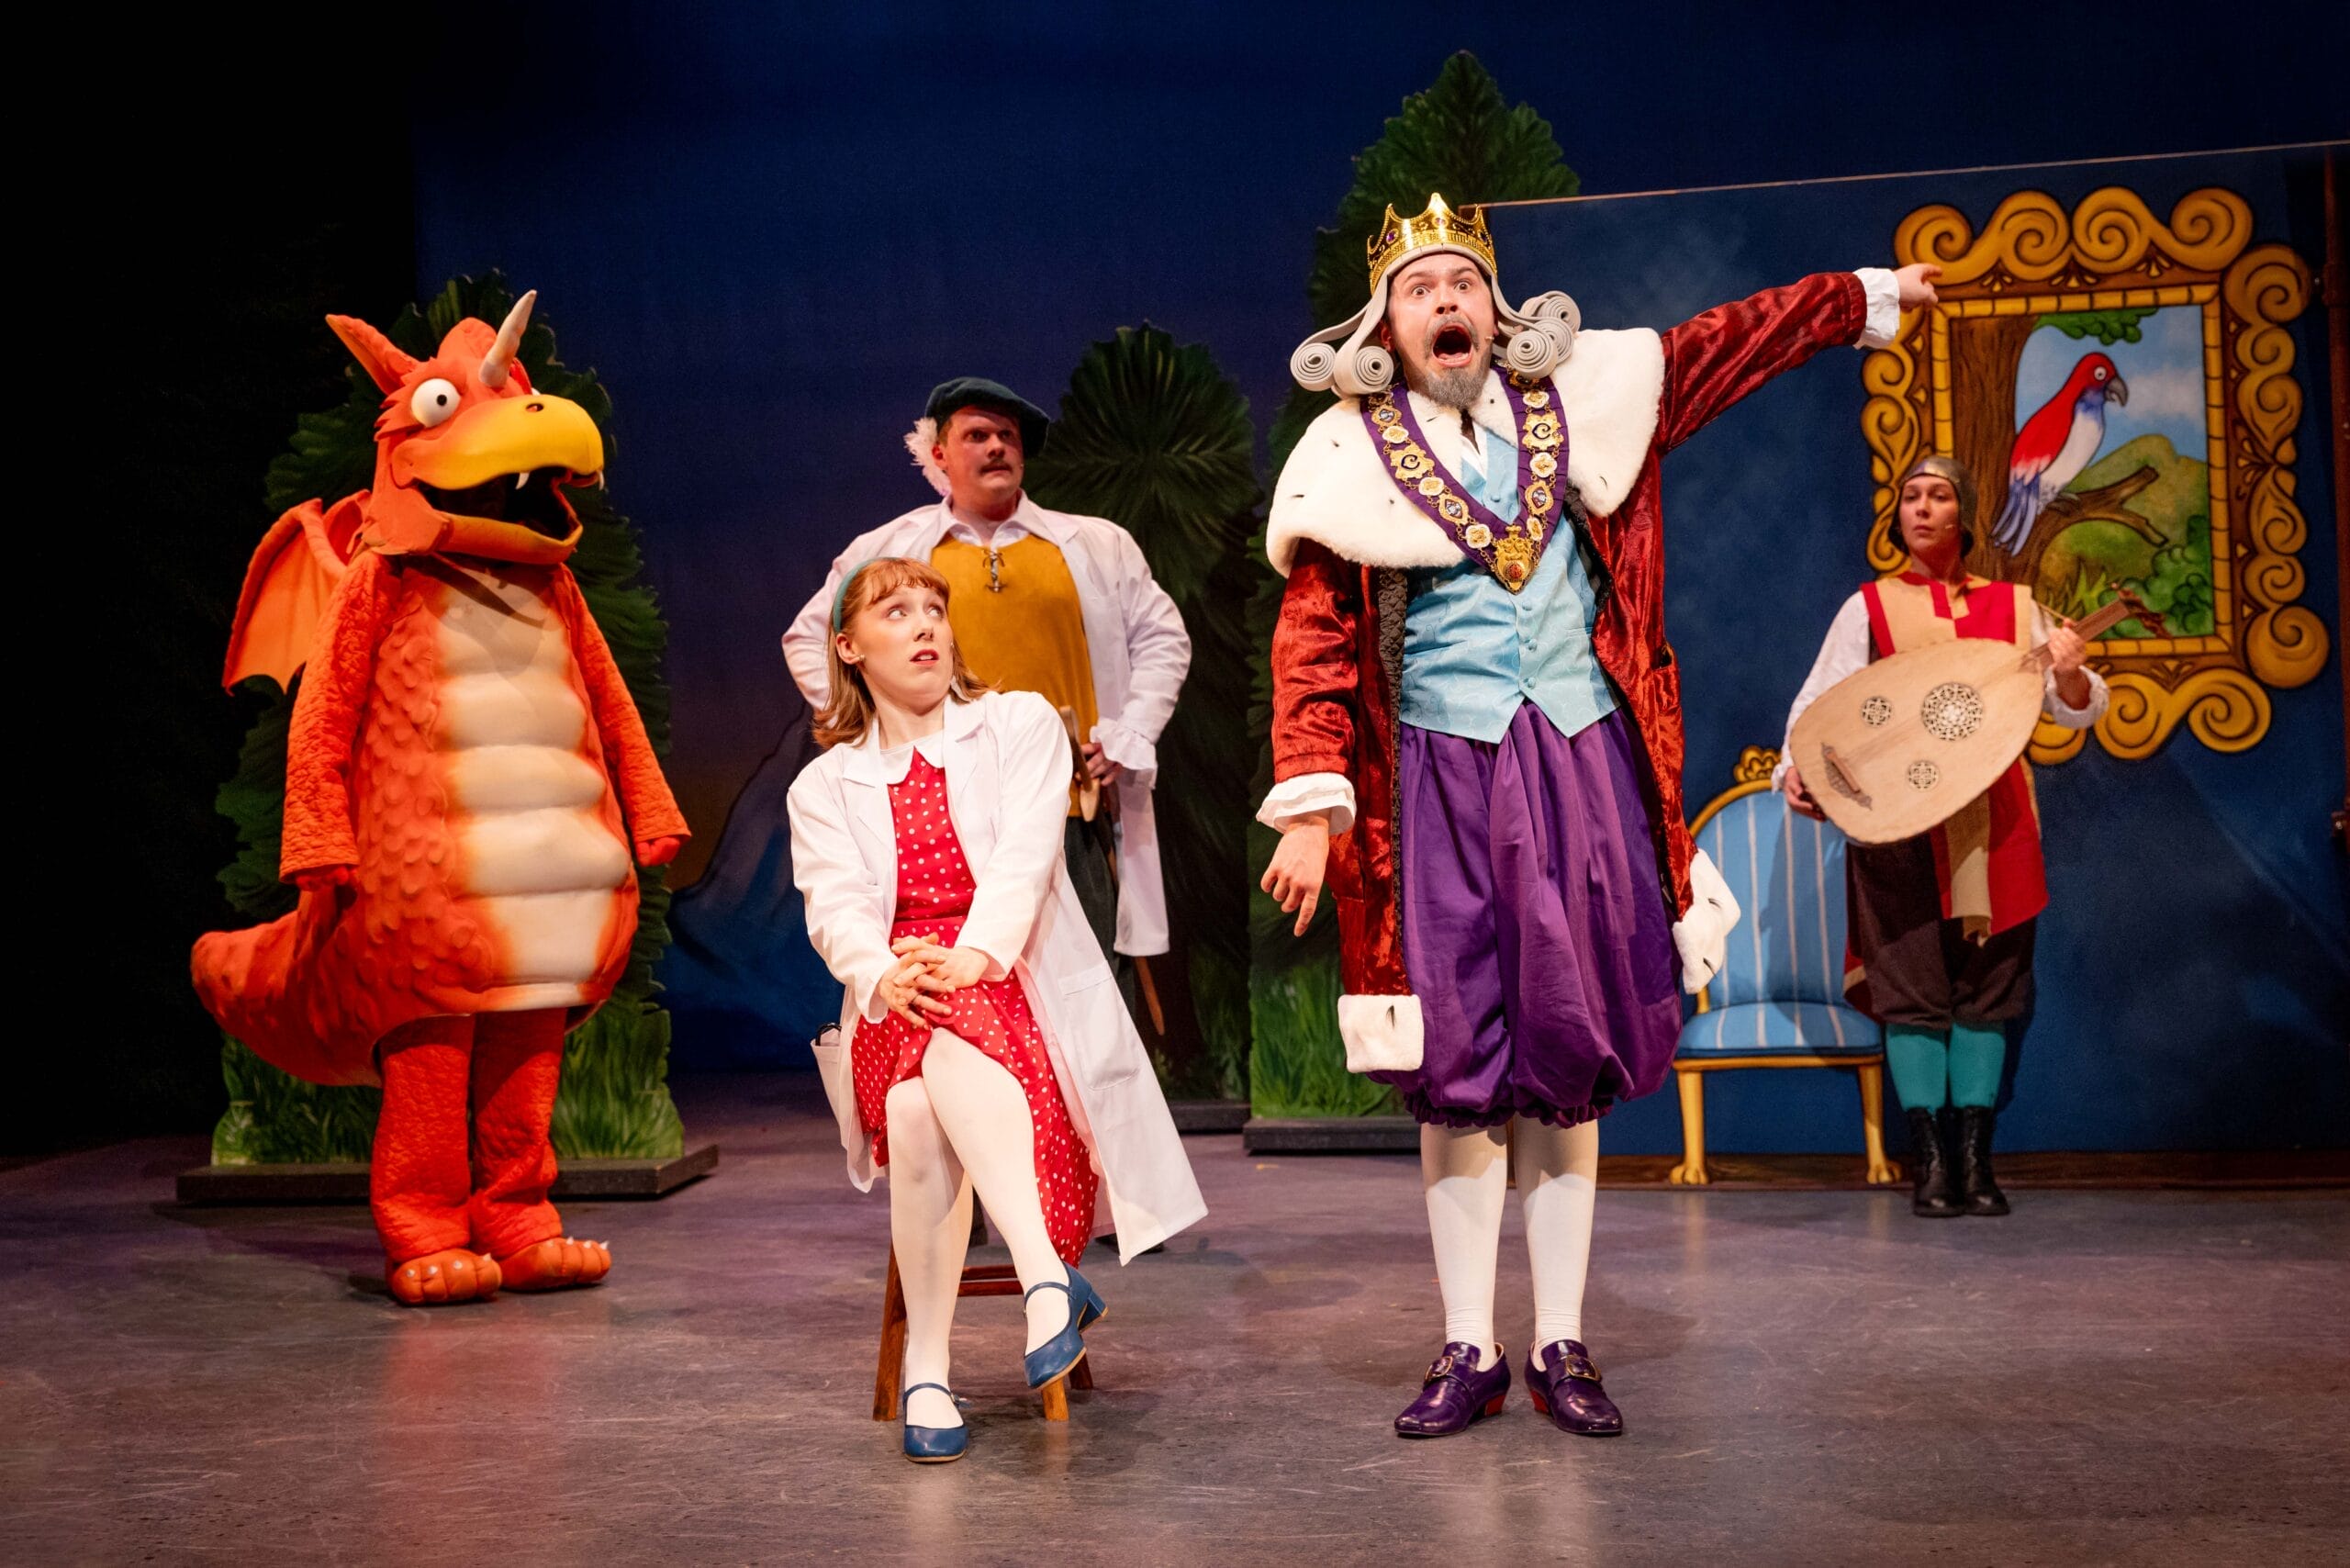 The king, in full regal regalia is shouting and is pointing to the right. Next to him is seated the princess dressed in a lab coat. The orange dragon Zog stands on the left and a lute player is on the right. Another scientist can be seen at the back of the stage.